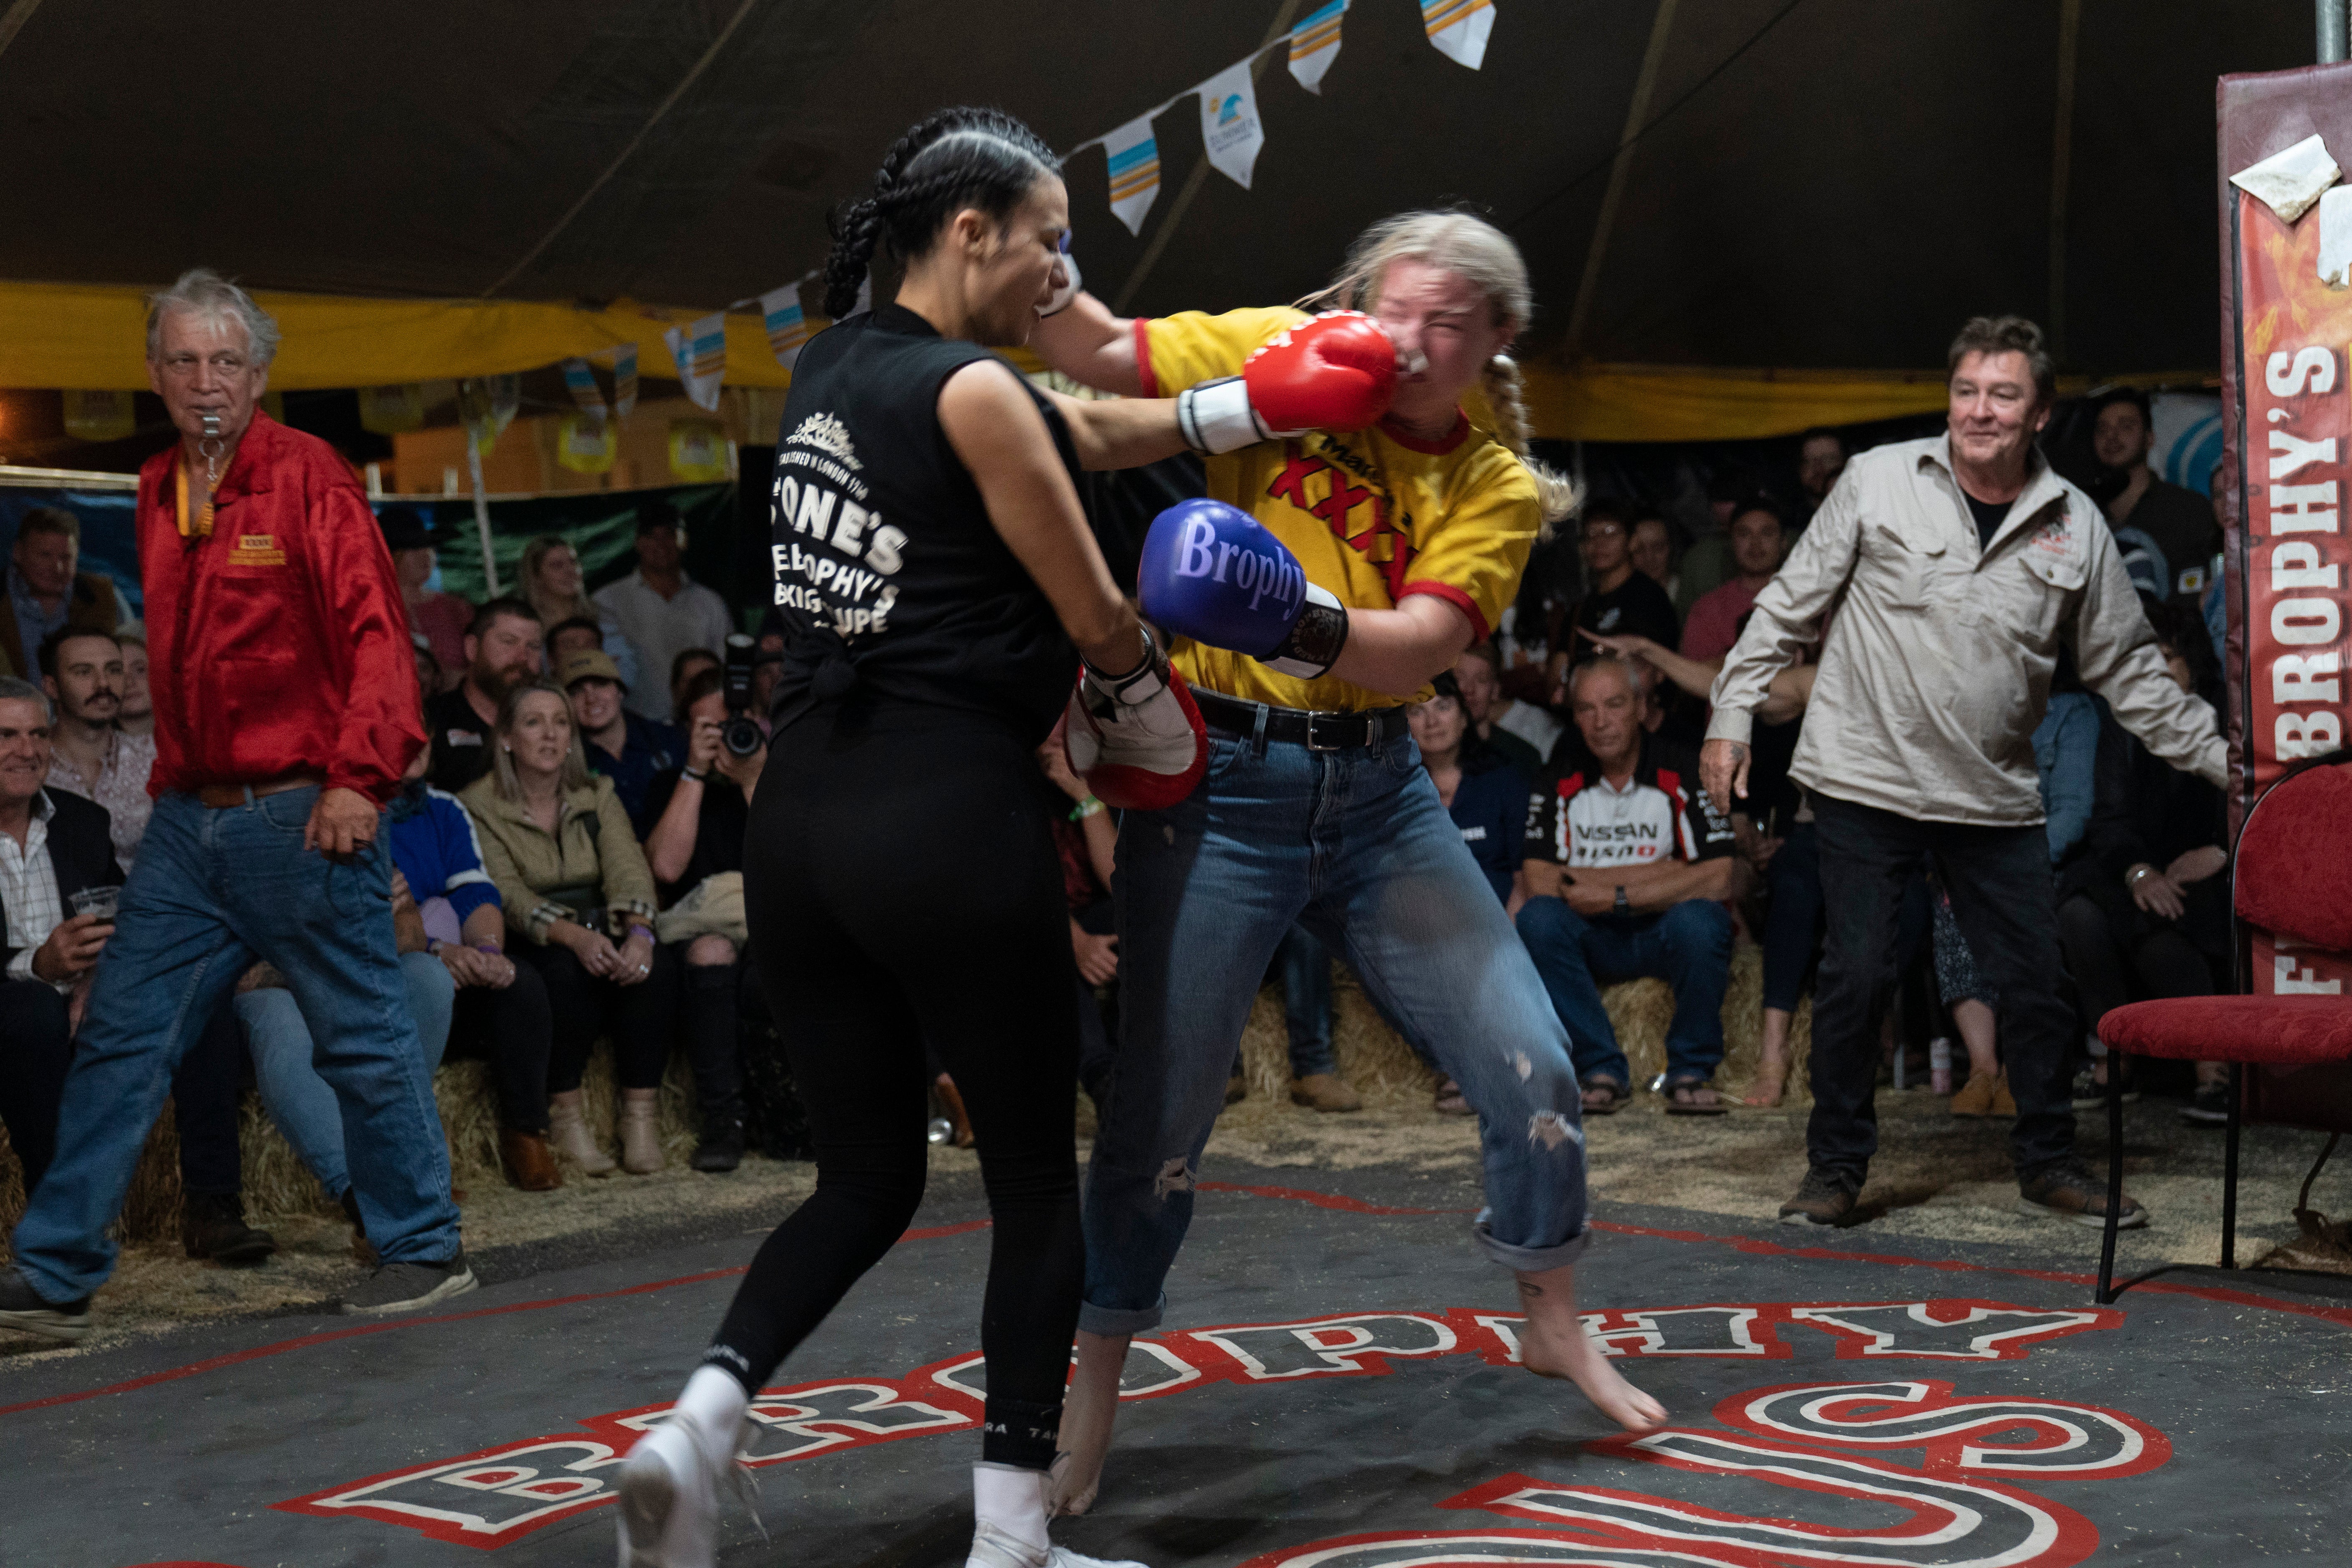 Soraya ‘Miss Mauler’ Johnston fights Caitlin Duffie, a volunteer from the audience